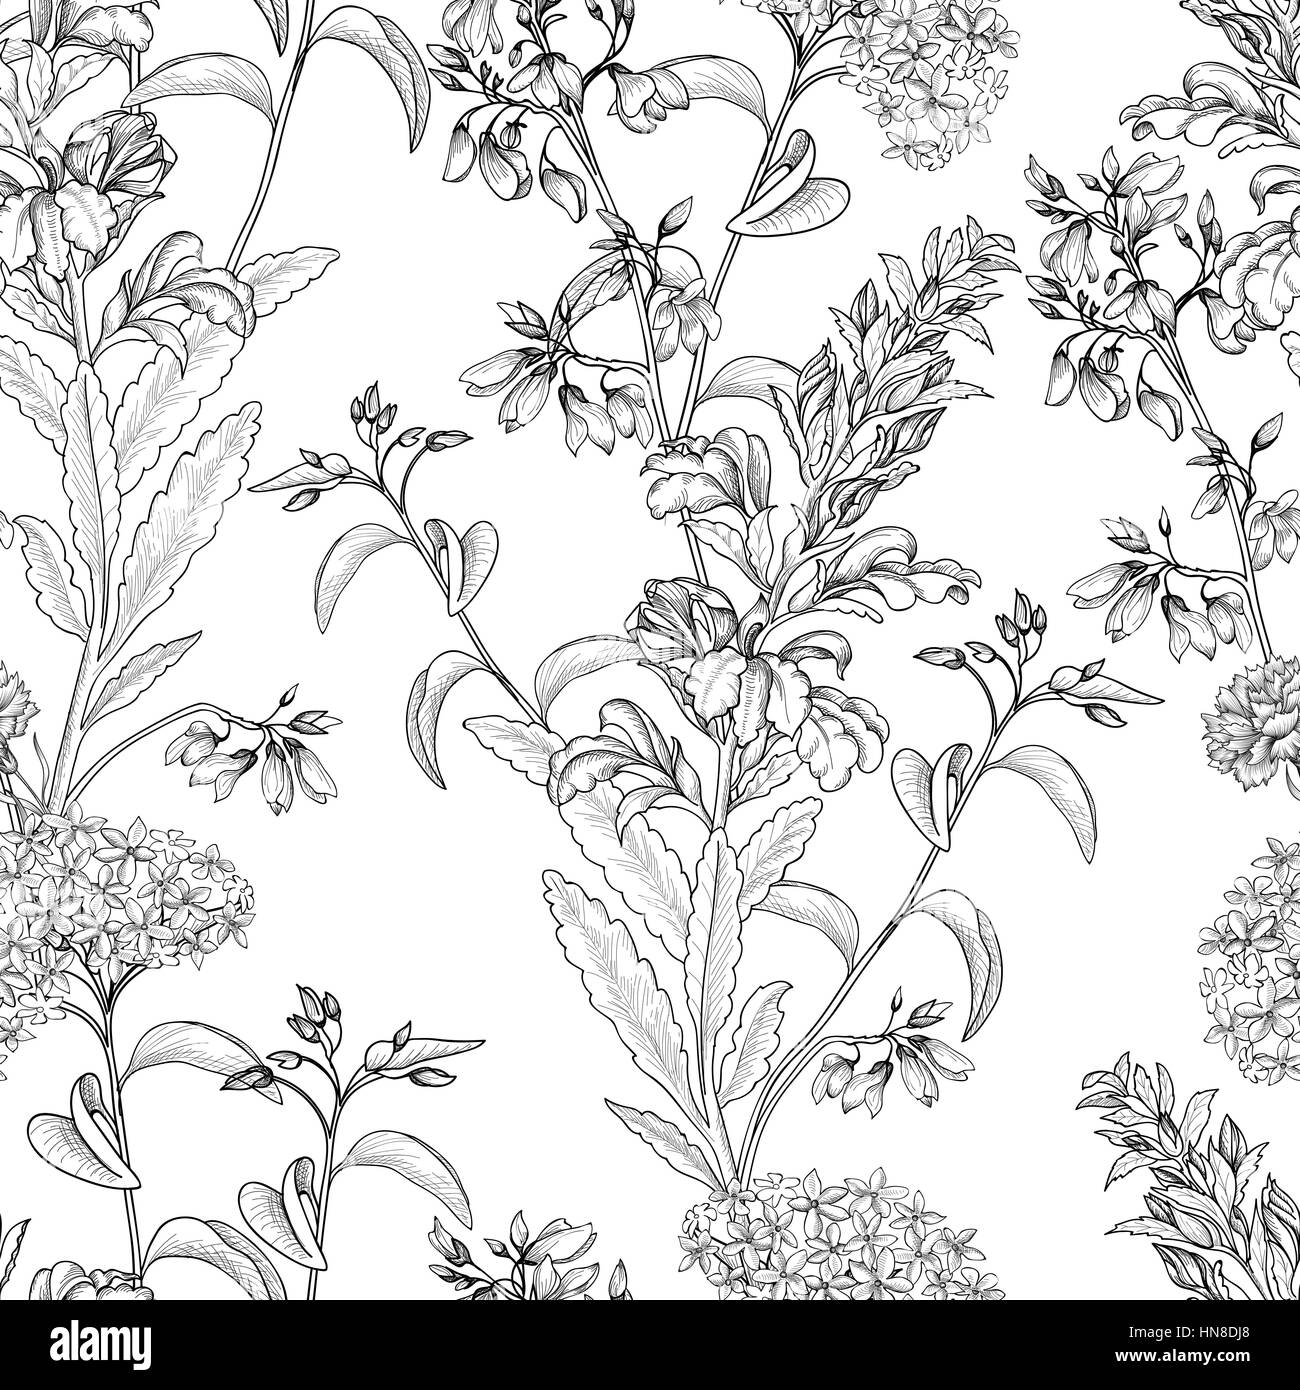 Floral seamless pattern. Flower background. Floral tile ornamental texture with flowers. Spring flourish garden Stock Vector